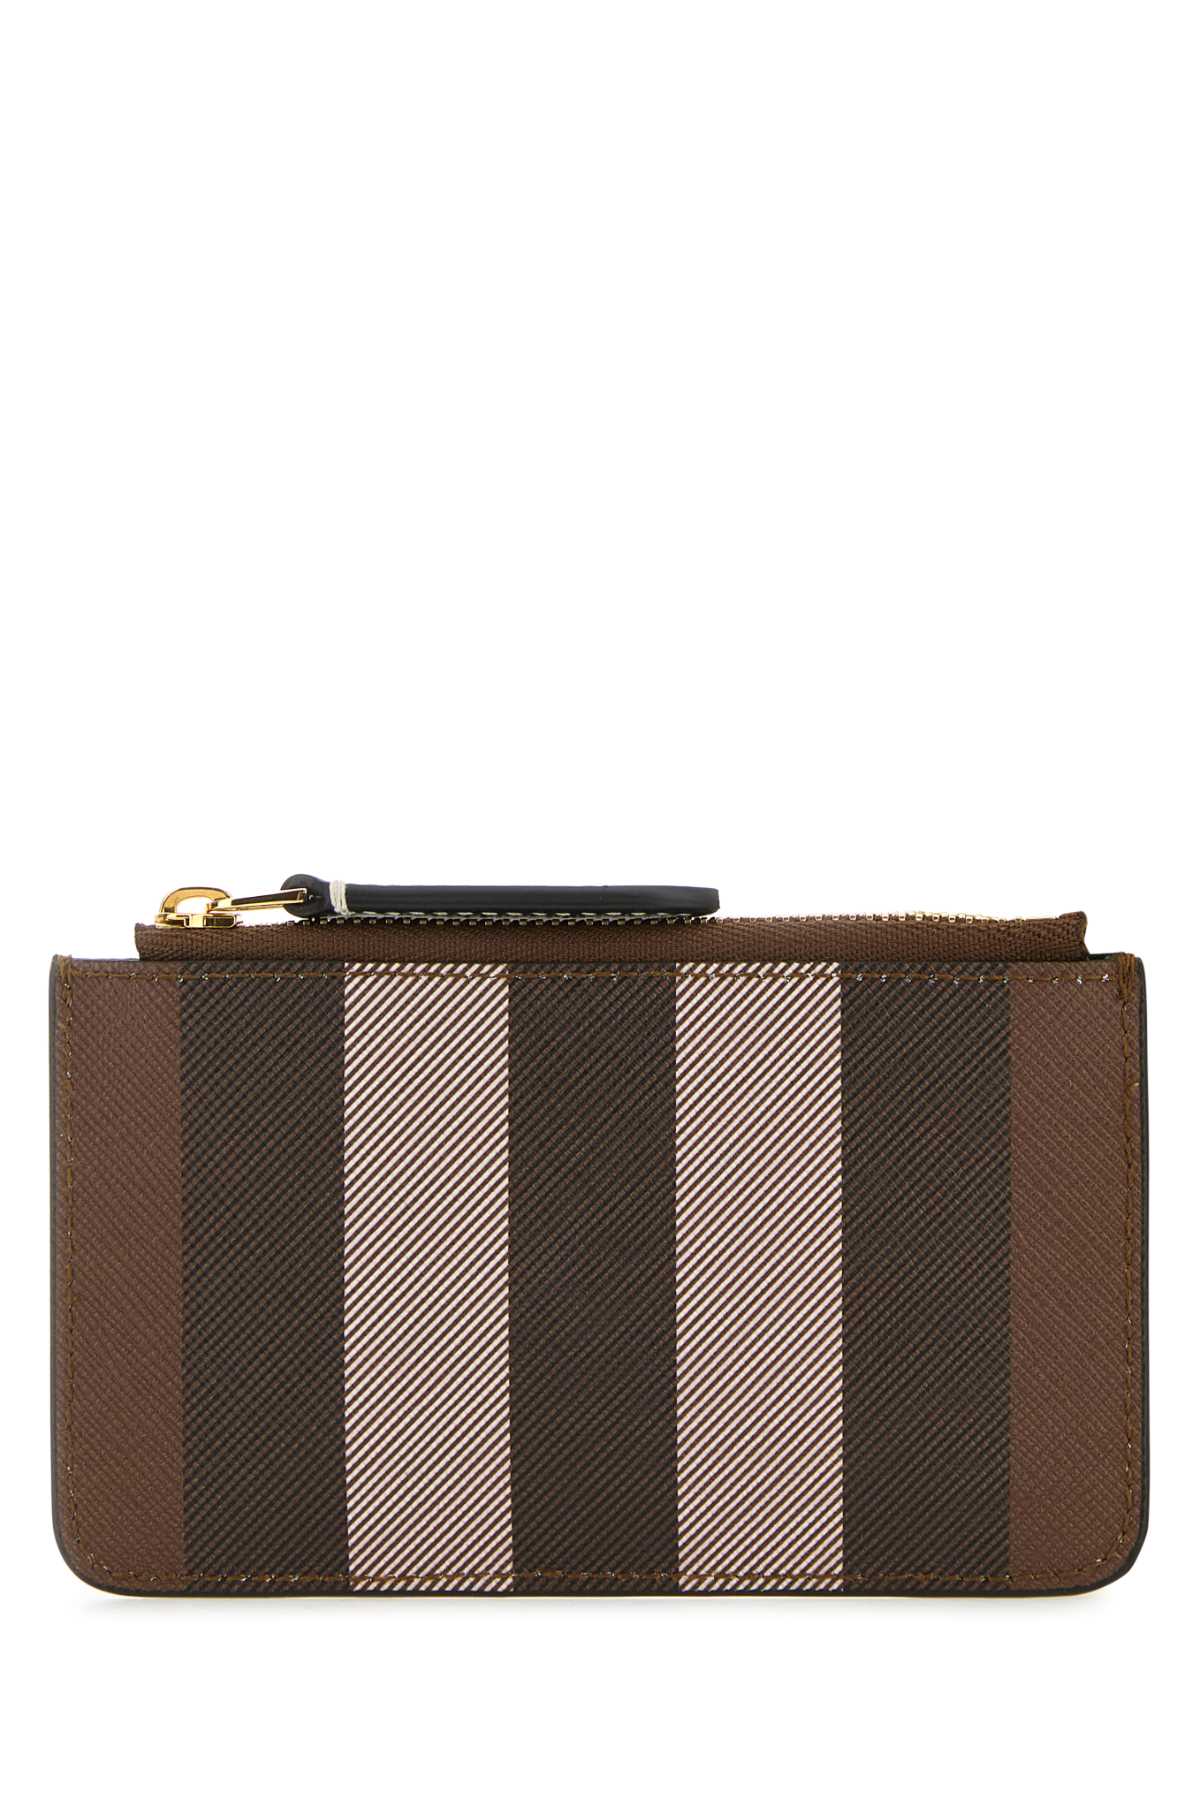 Burberry Printed Canvas Coin Purse In A8900